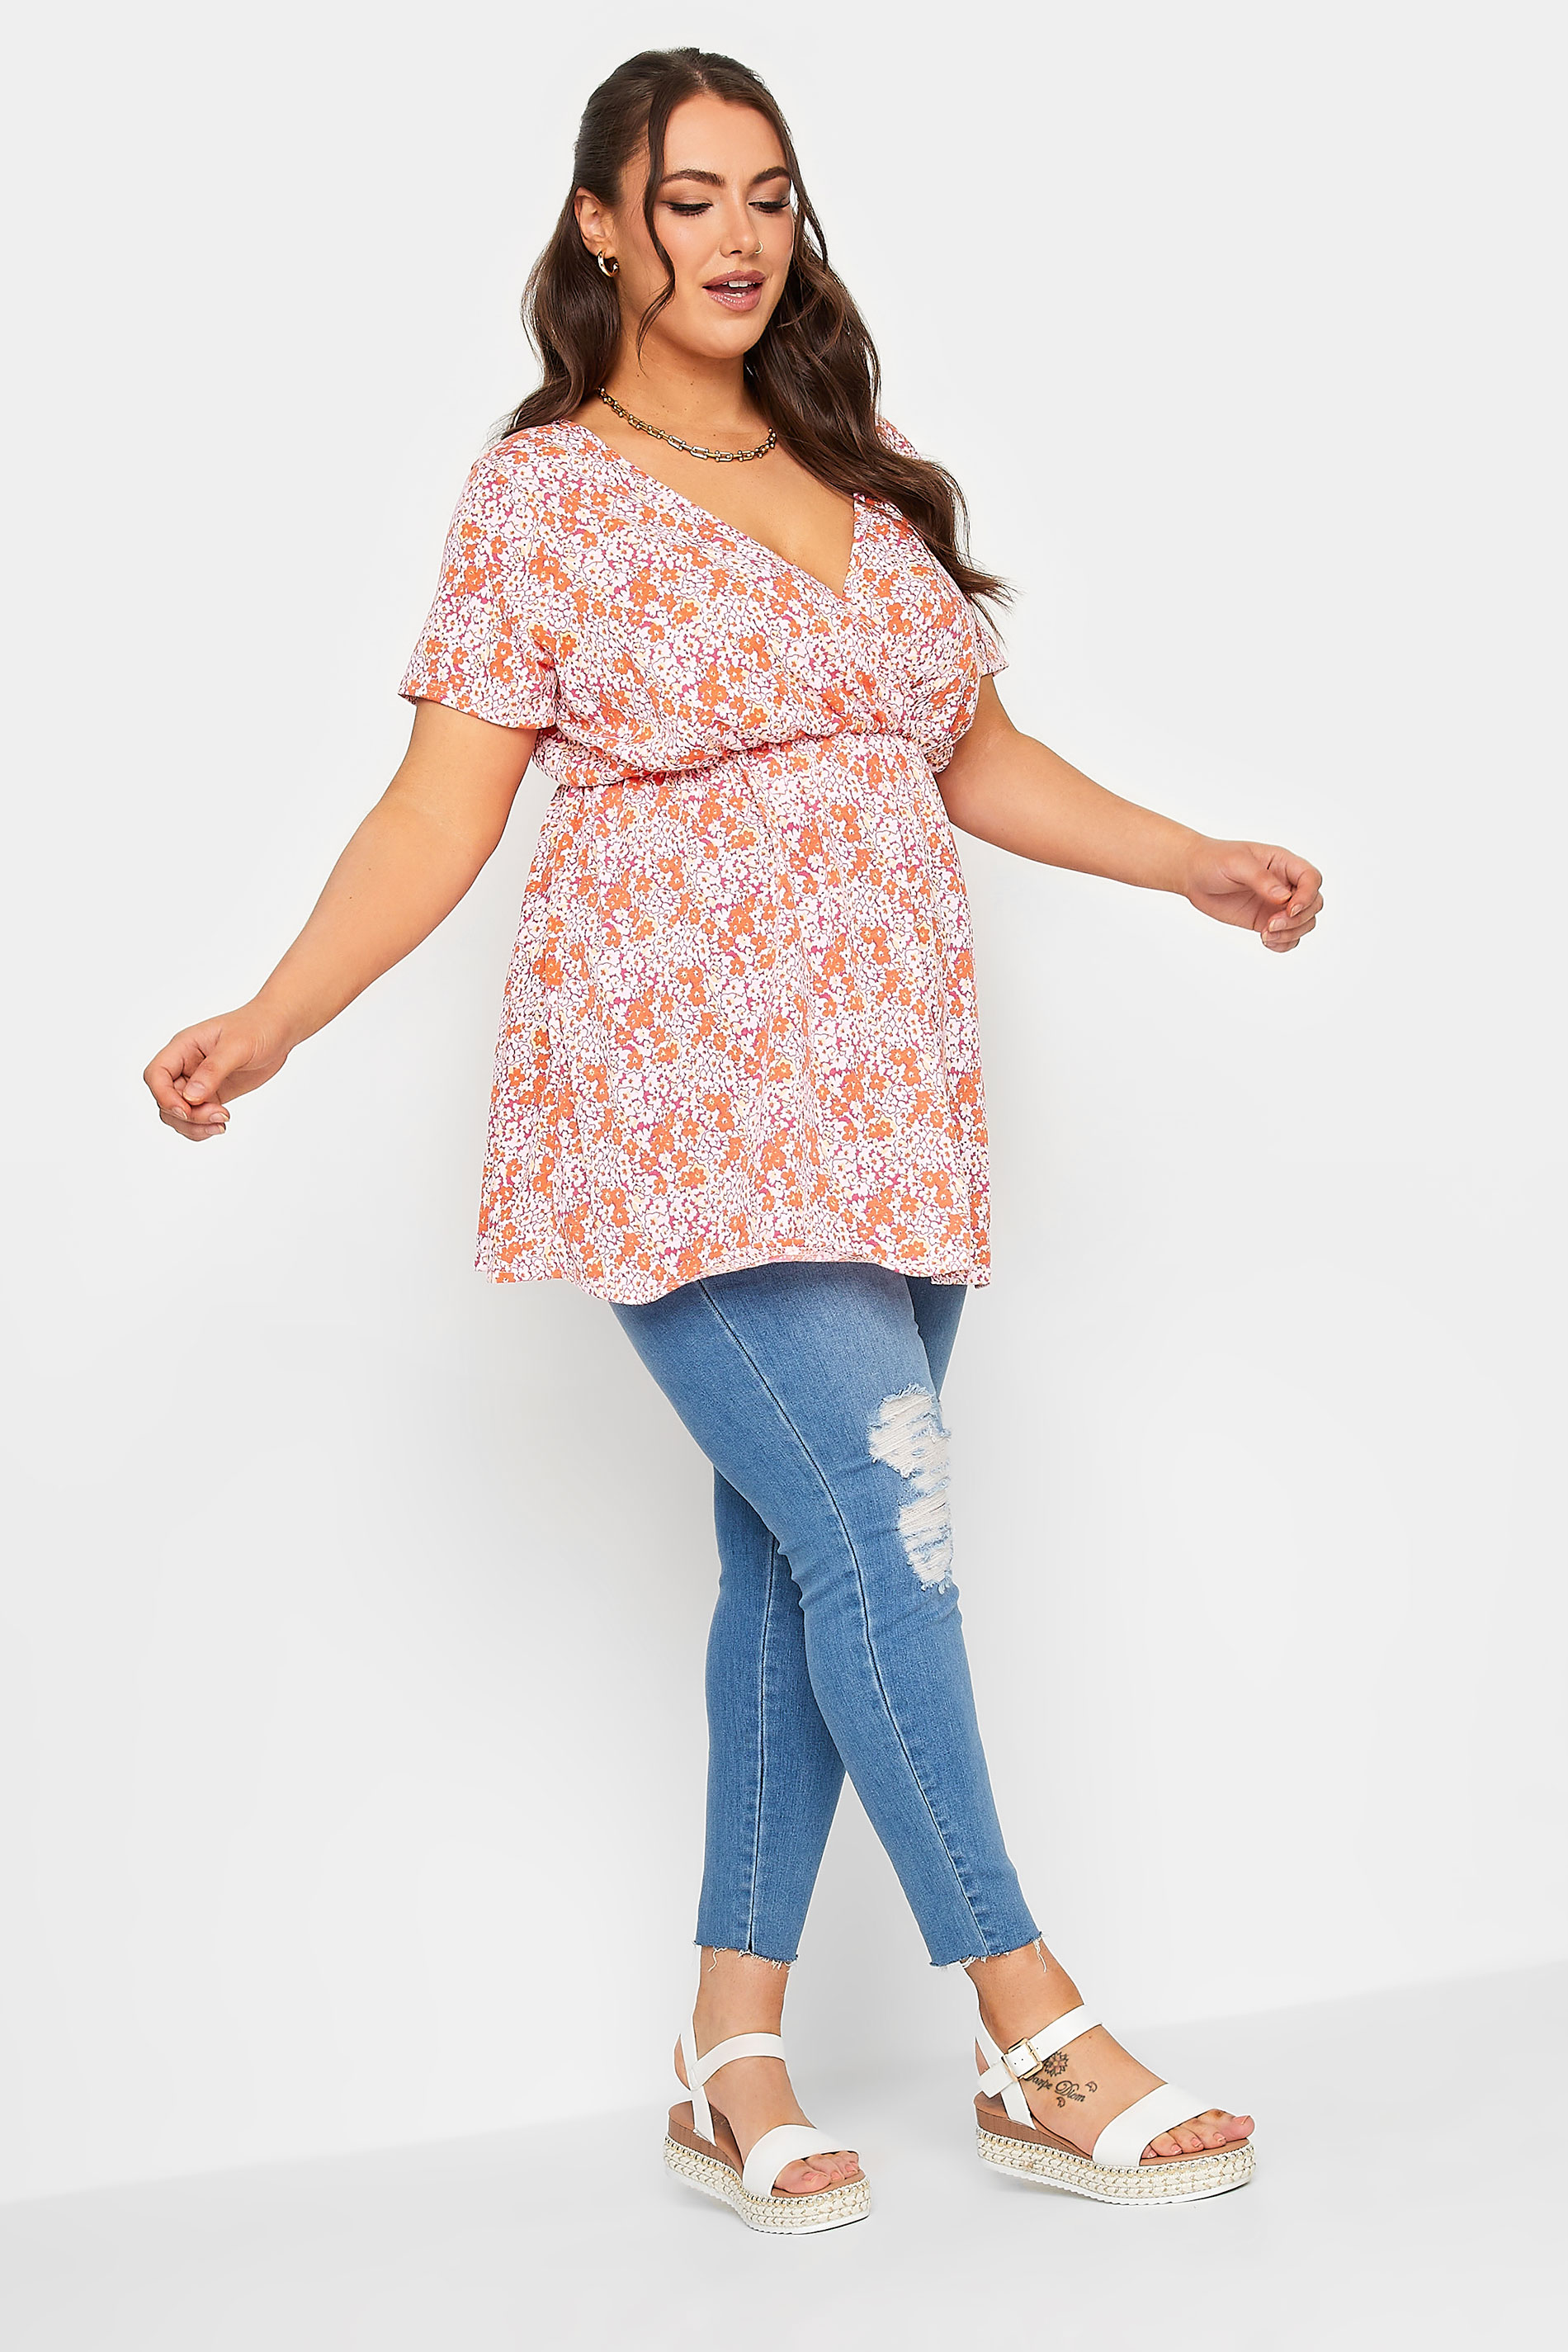 LIMITED COLLECTION Plus Size Orange Floral Tie Back Top | Yours Clothing 3